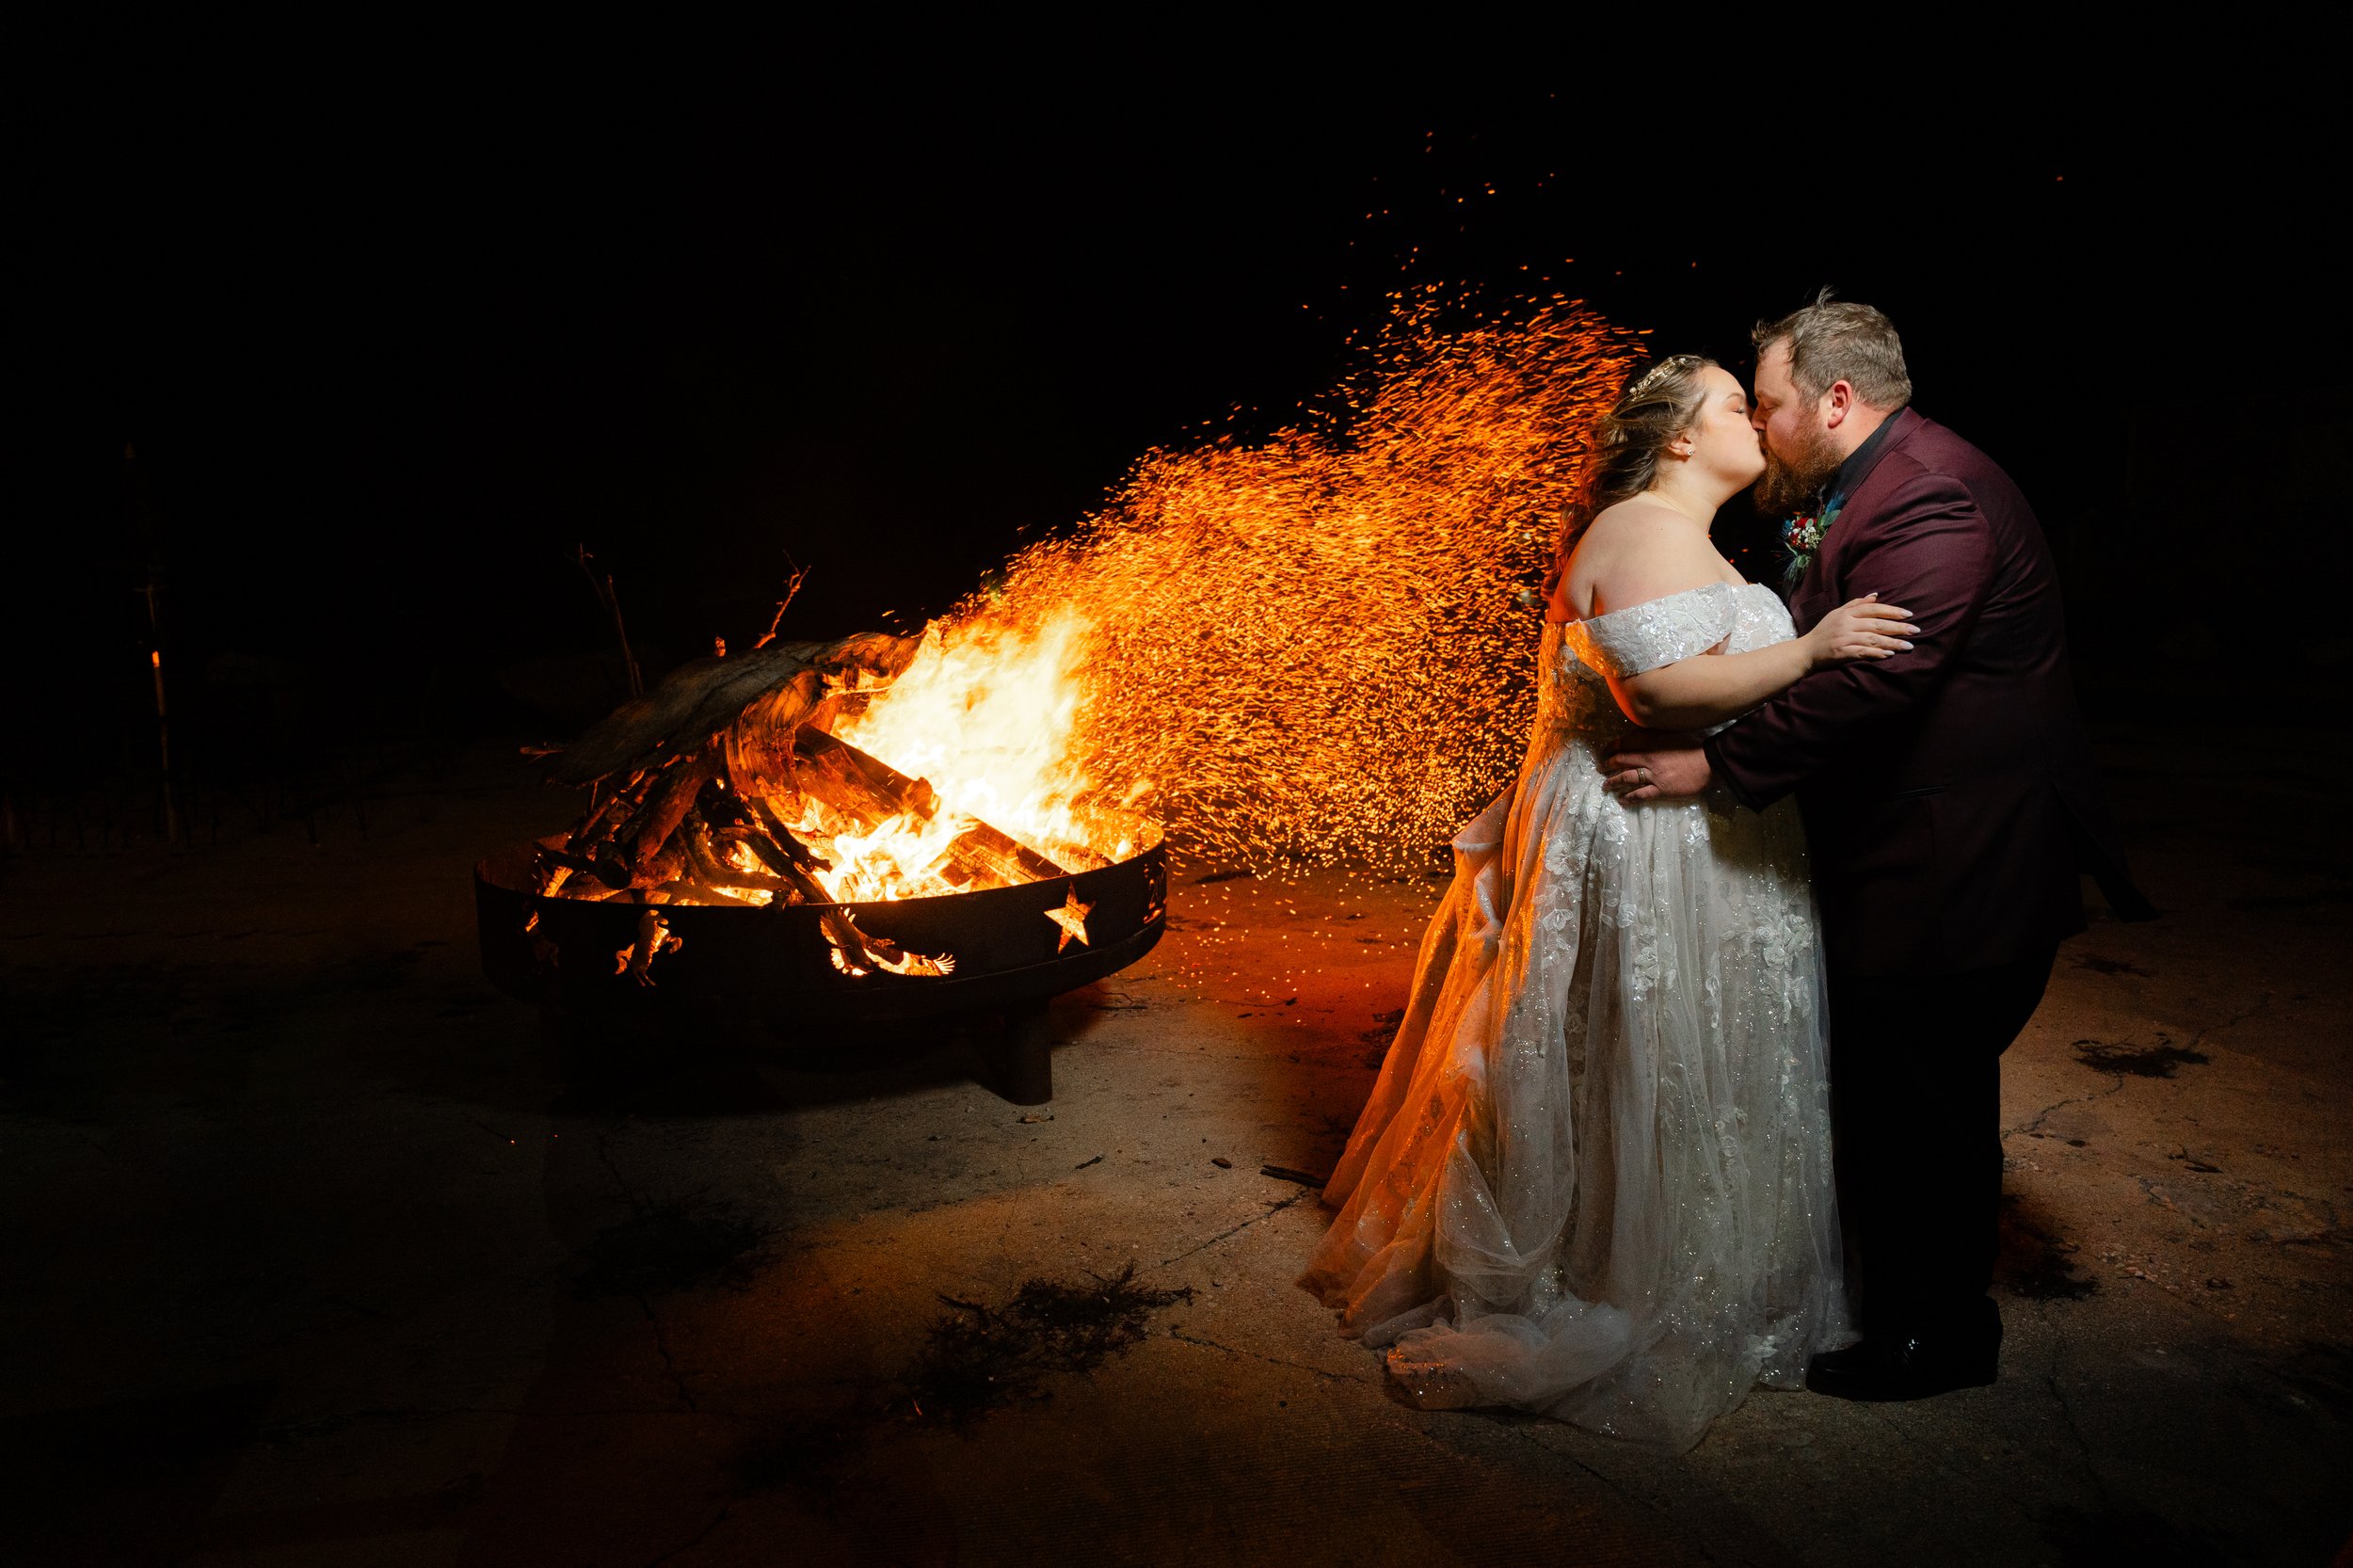 Wedding day photos with fire